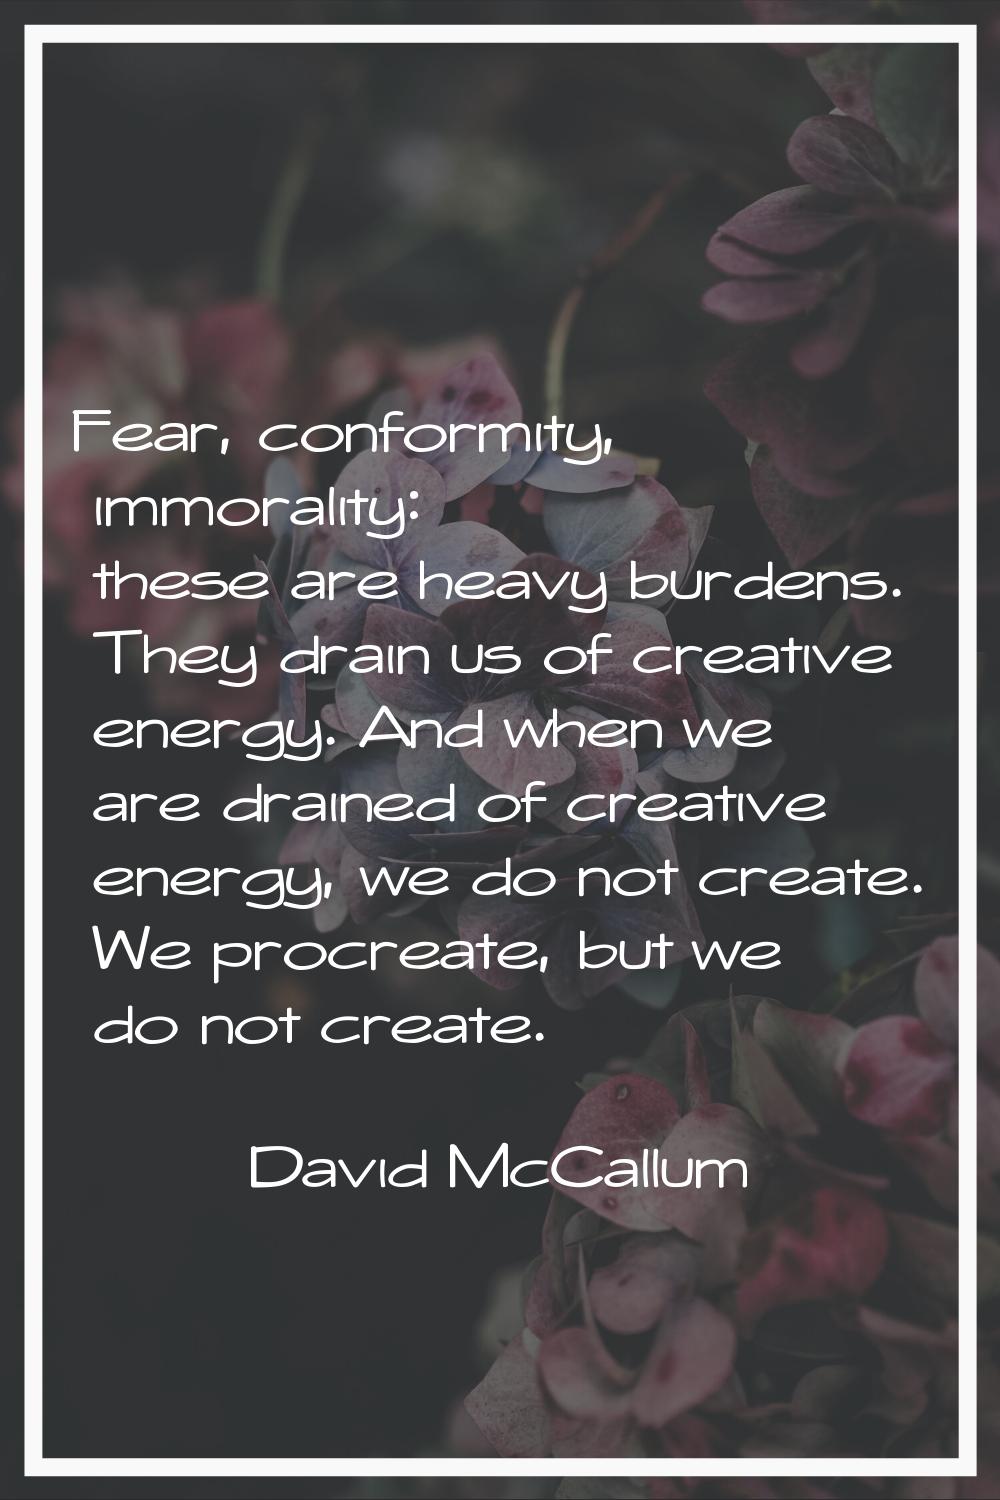 Fear, conformity, immorality: these are heavy burdens. They drain us of creative energy. And when w